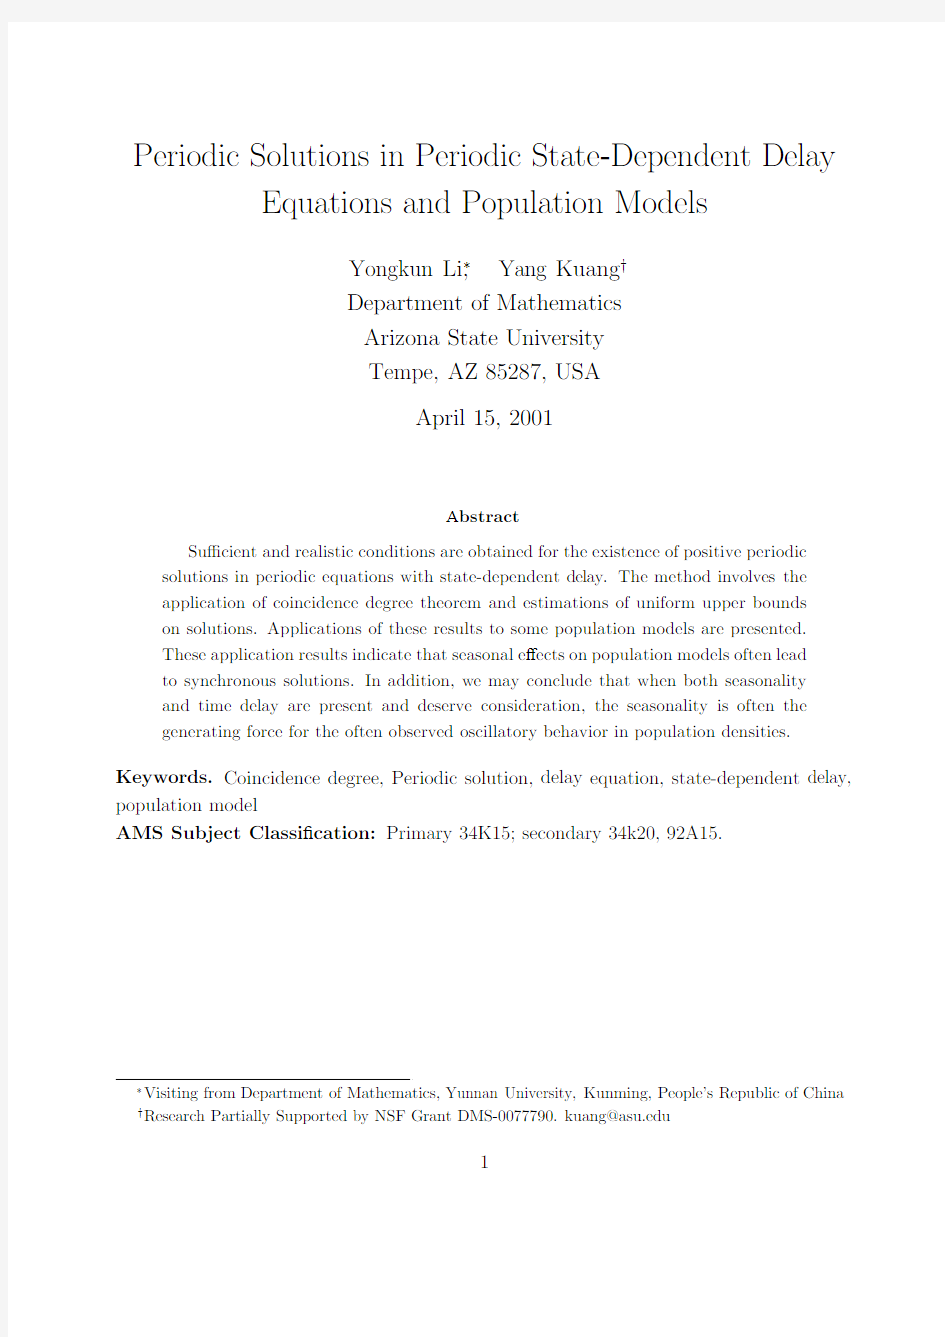 Periodic solutions in periodic state-dependent delay equations and population models